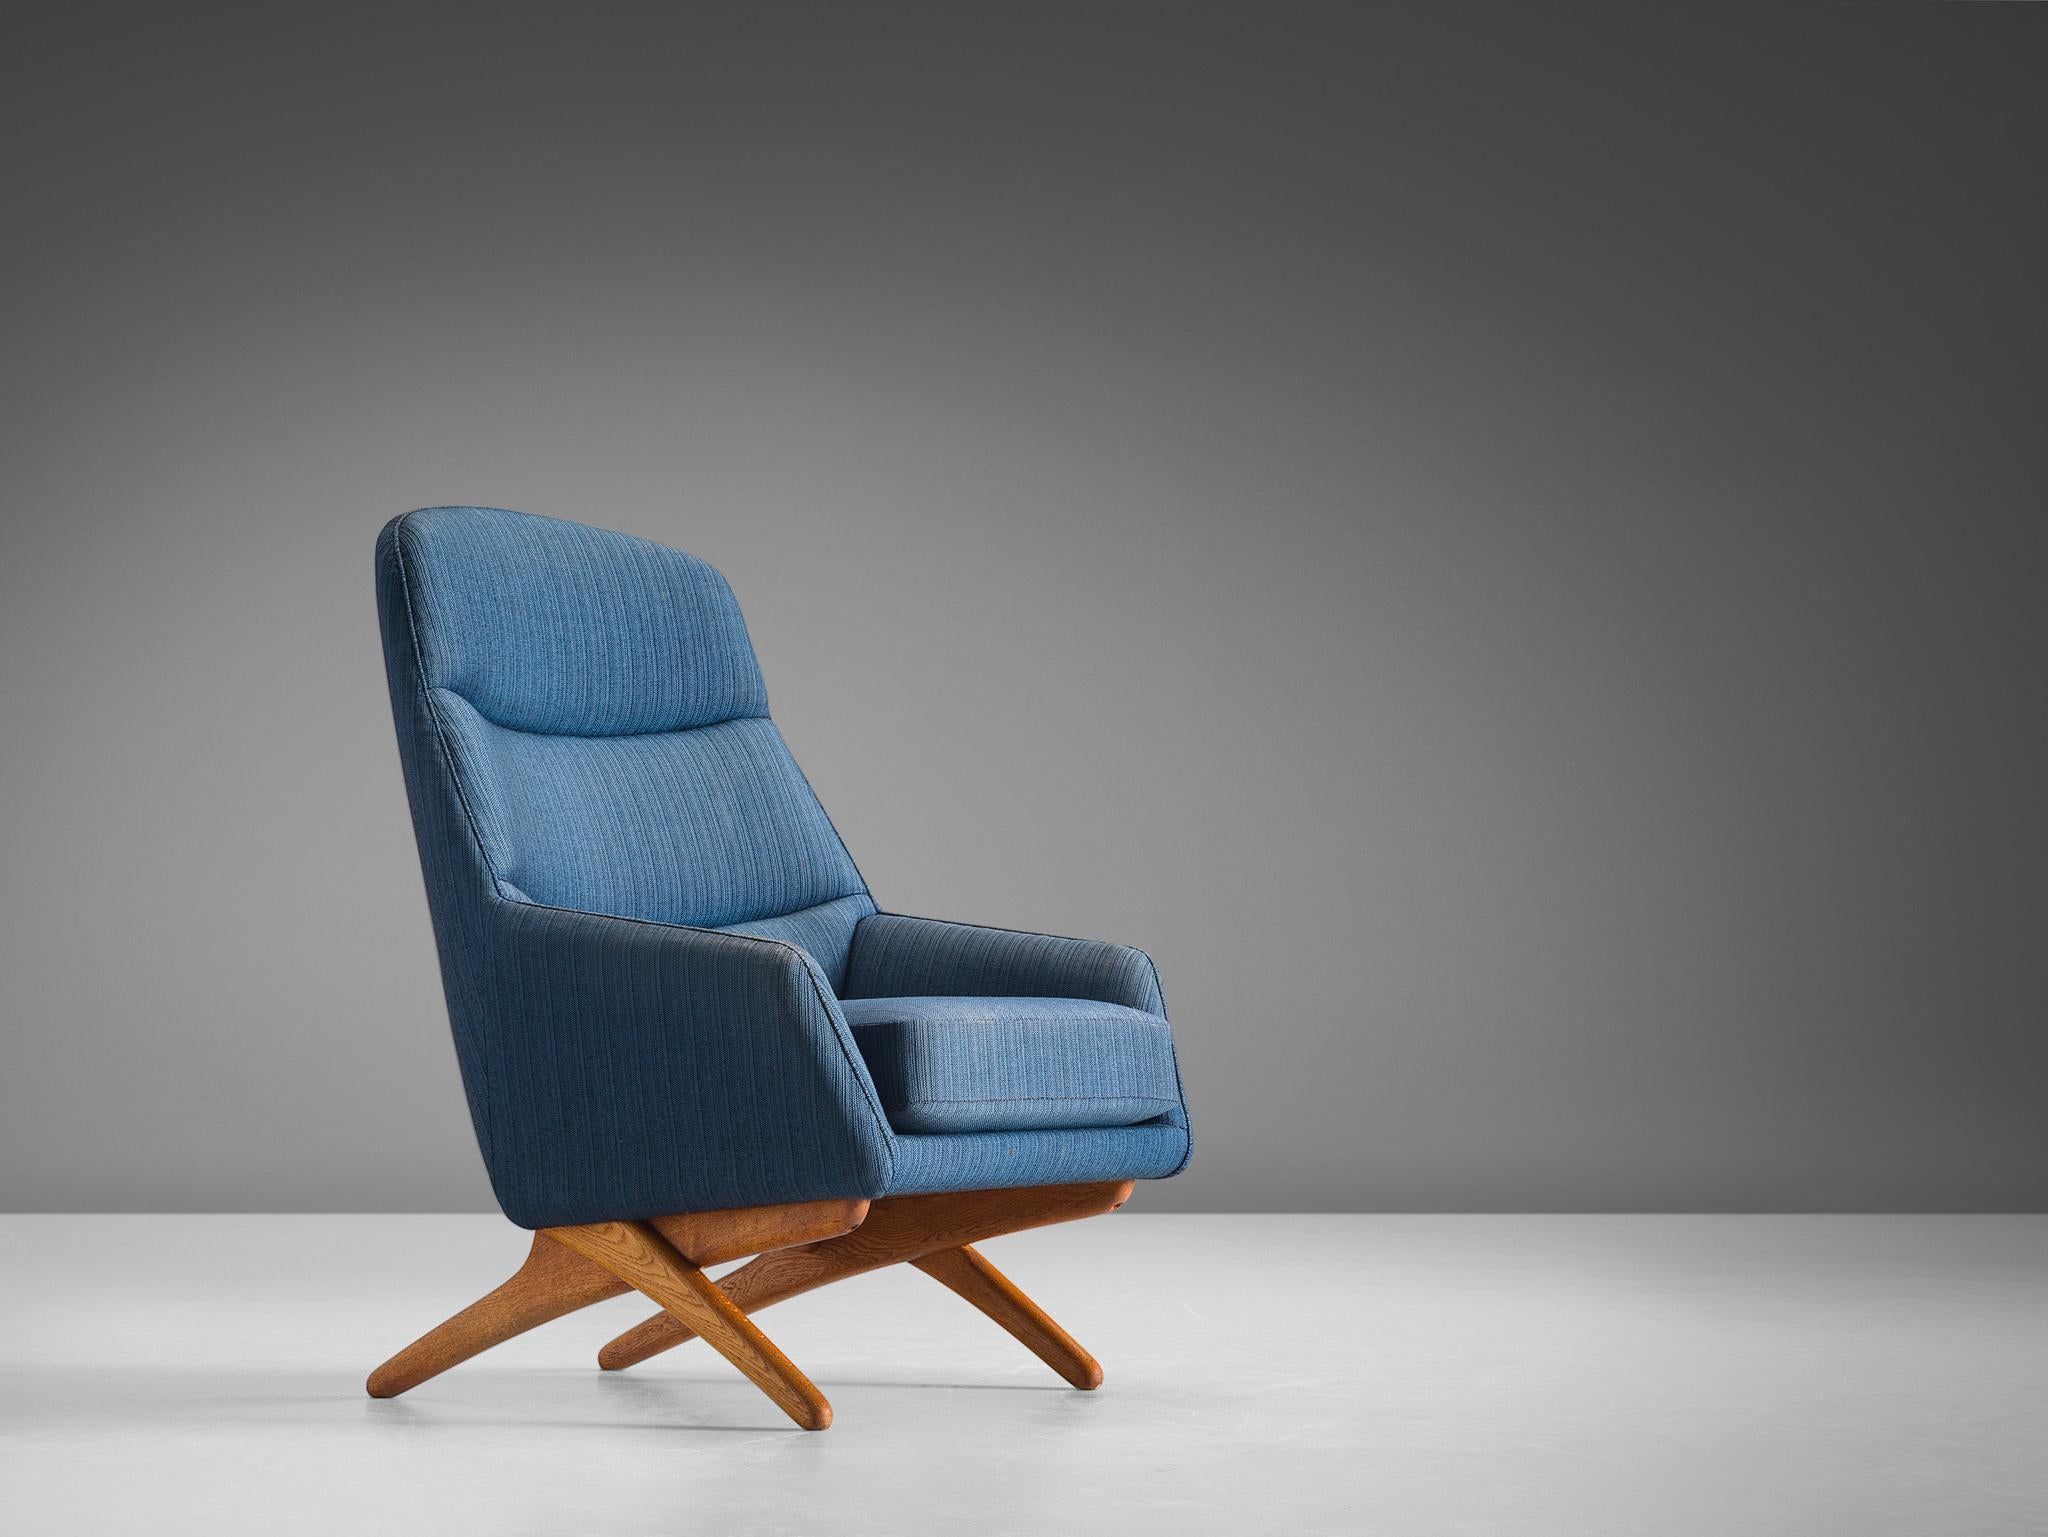 Illum Wikkelsø, blue fabric and oak lounge chair, Denmark, 1960s.

This lounge chair was designed by Illum Wikkelsø and manufactured by Mikael Laursen in Denmark in the 1960s. This lounge set is comfortable and shows playful details. The chair bends